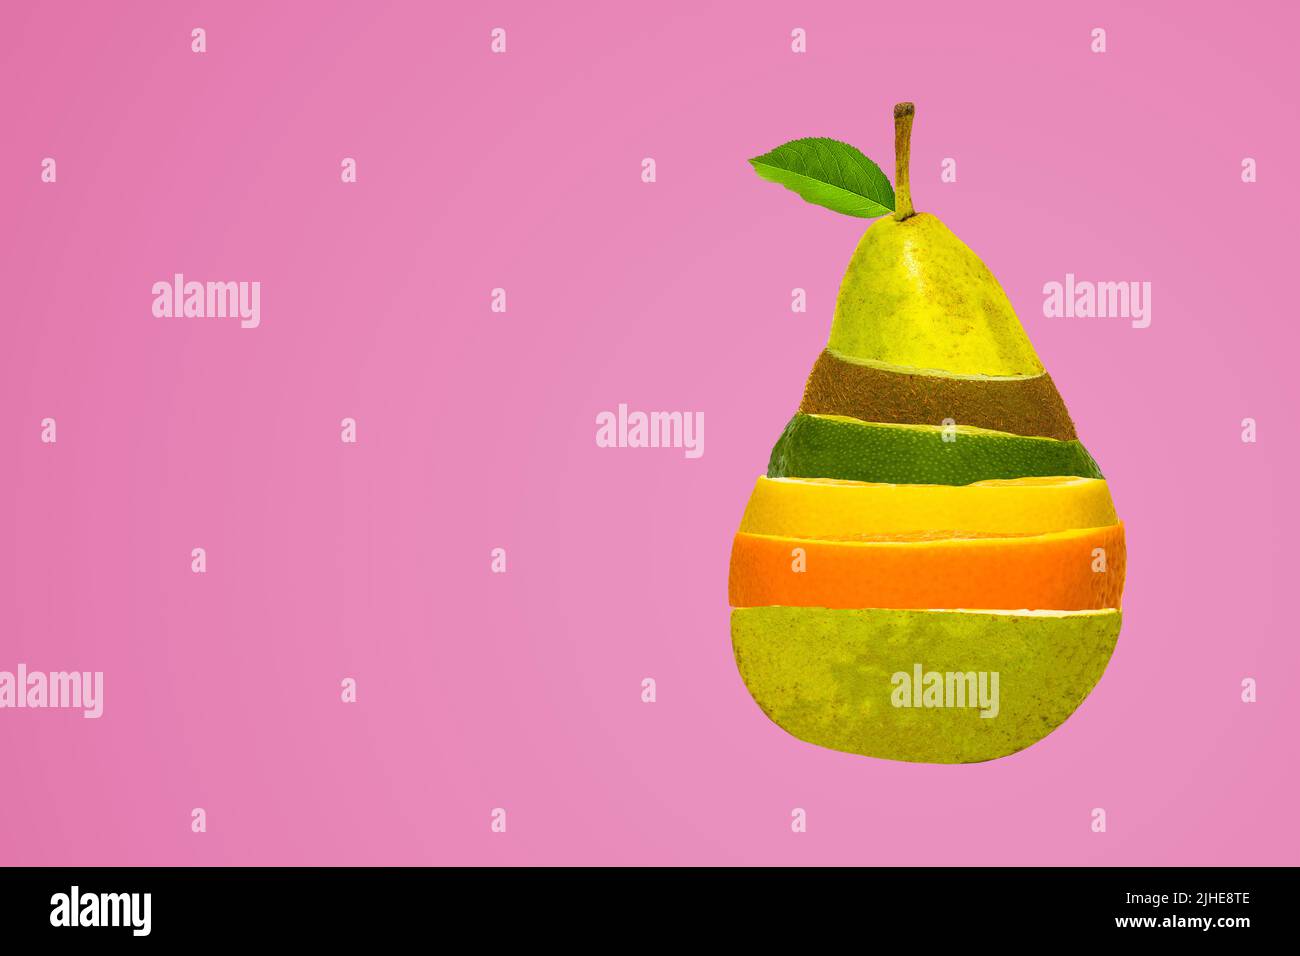 concept image of mixed fruit salad in a pear shape shaped mix of pear kiwi orange lemon lime on a colorful colourful pink background Stock Photo